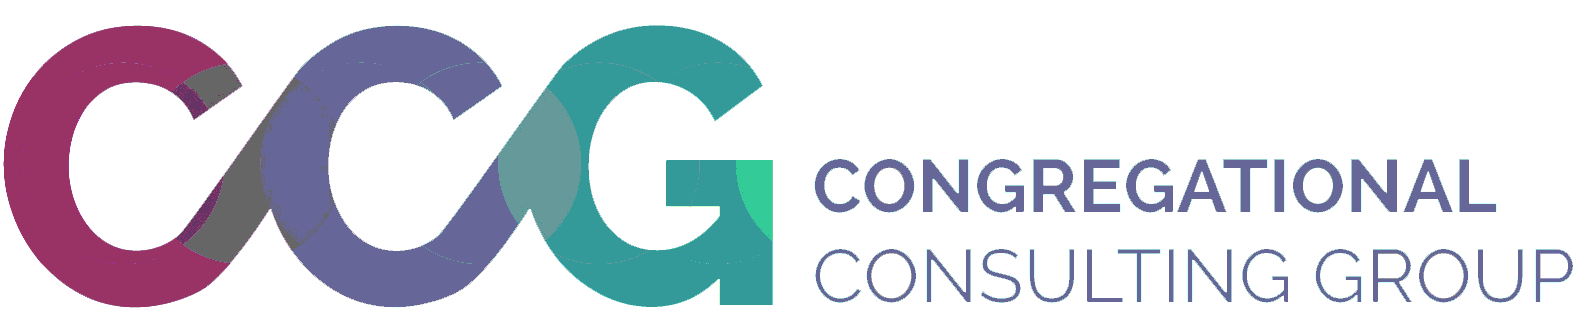 Congregational Consulting Group logo